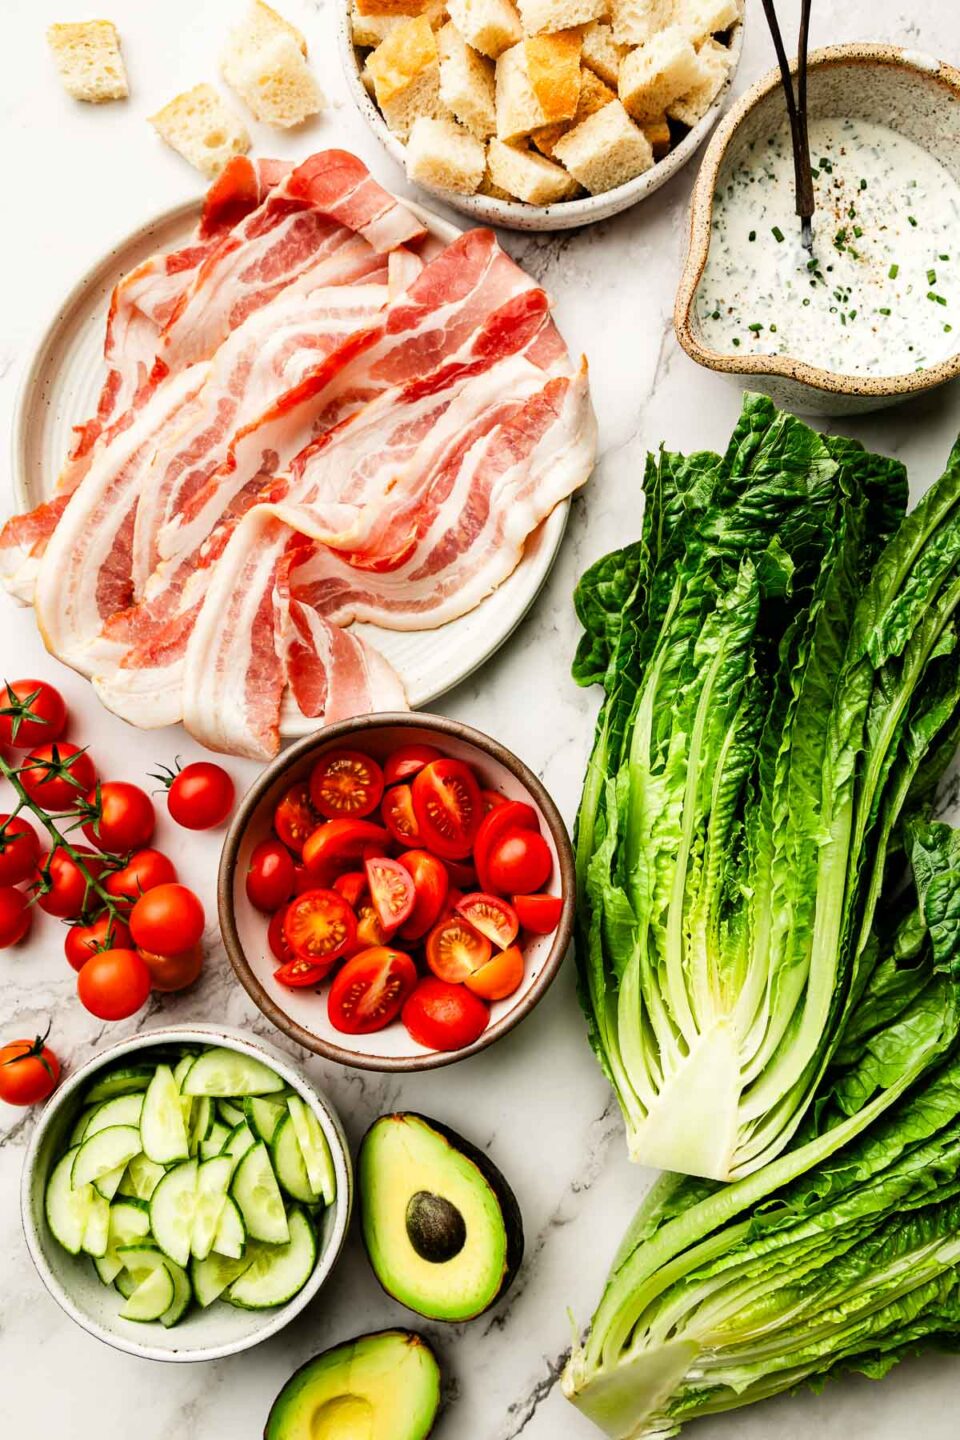 An overhead shot of ingredients on a white marbled surface: lettuce, sliced cherry tomatoes, raw bacon, halved avocado, cubed sourdough, sliced cucumbers and a bowl of dressing.